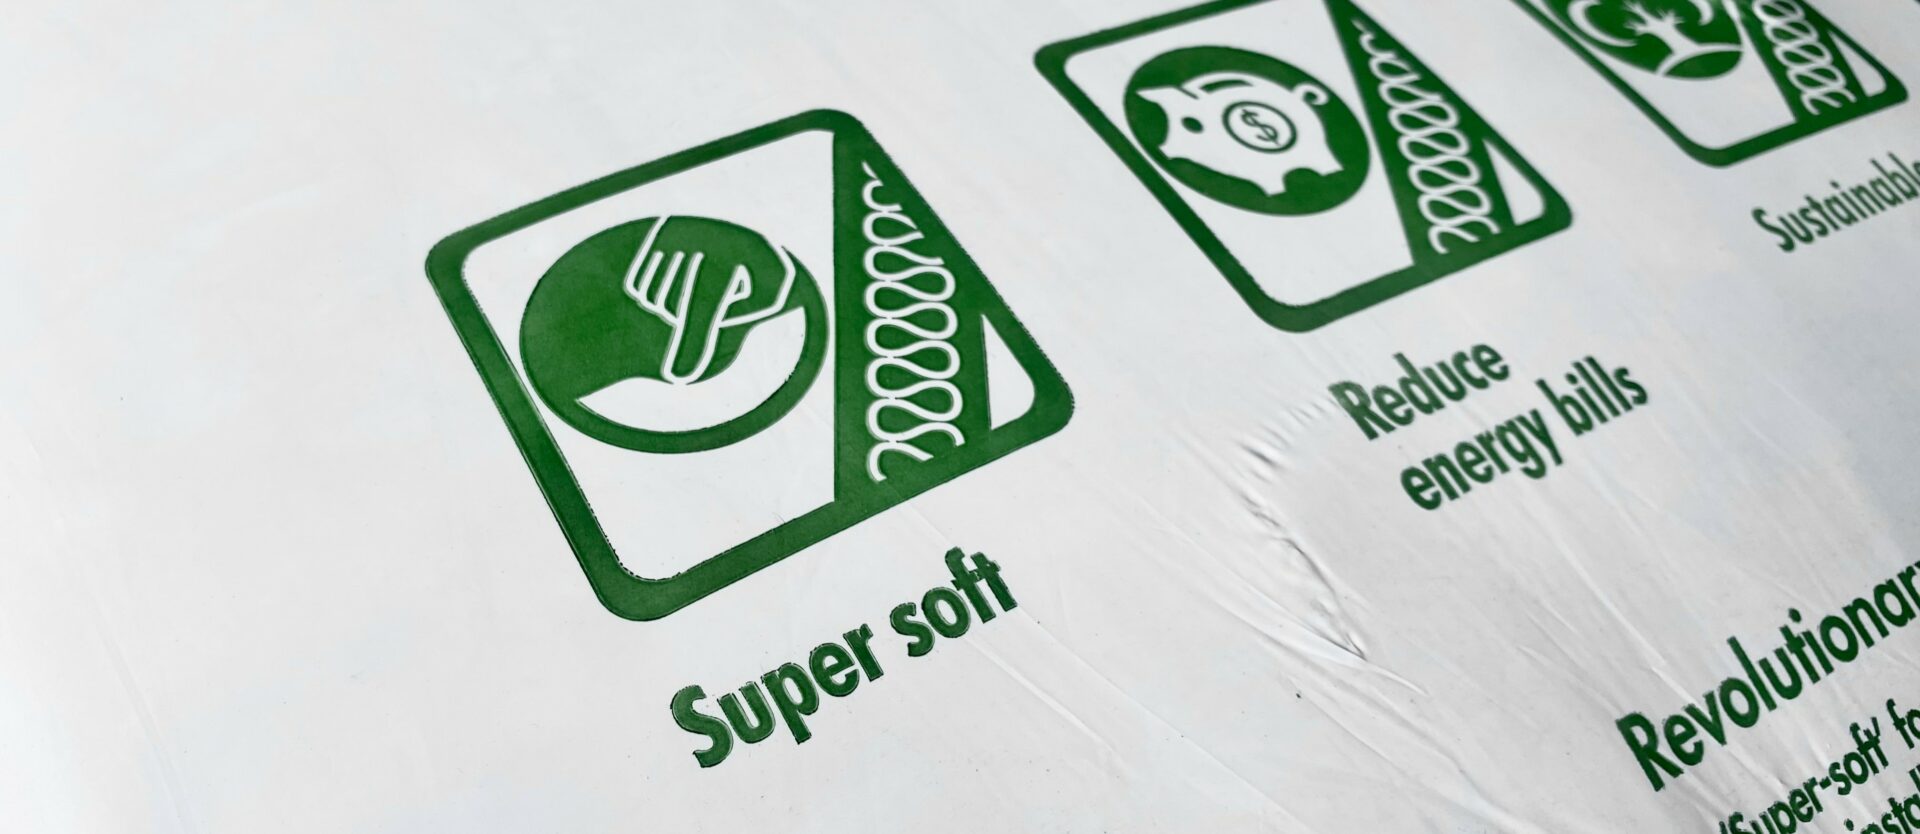 Knauf Earthwool Insulation packaging shows the benefits of the insulation, including being "Super Soft", and "Reducing Energy Bills"